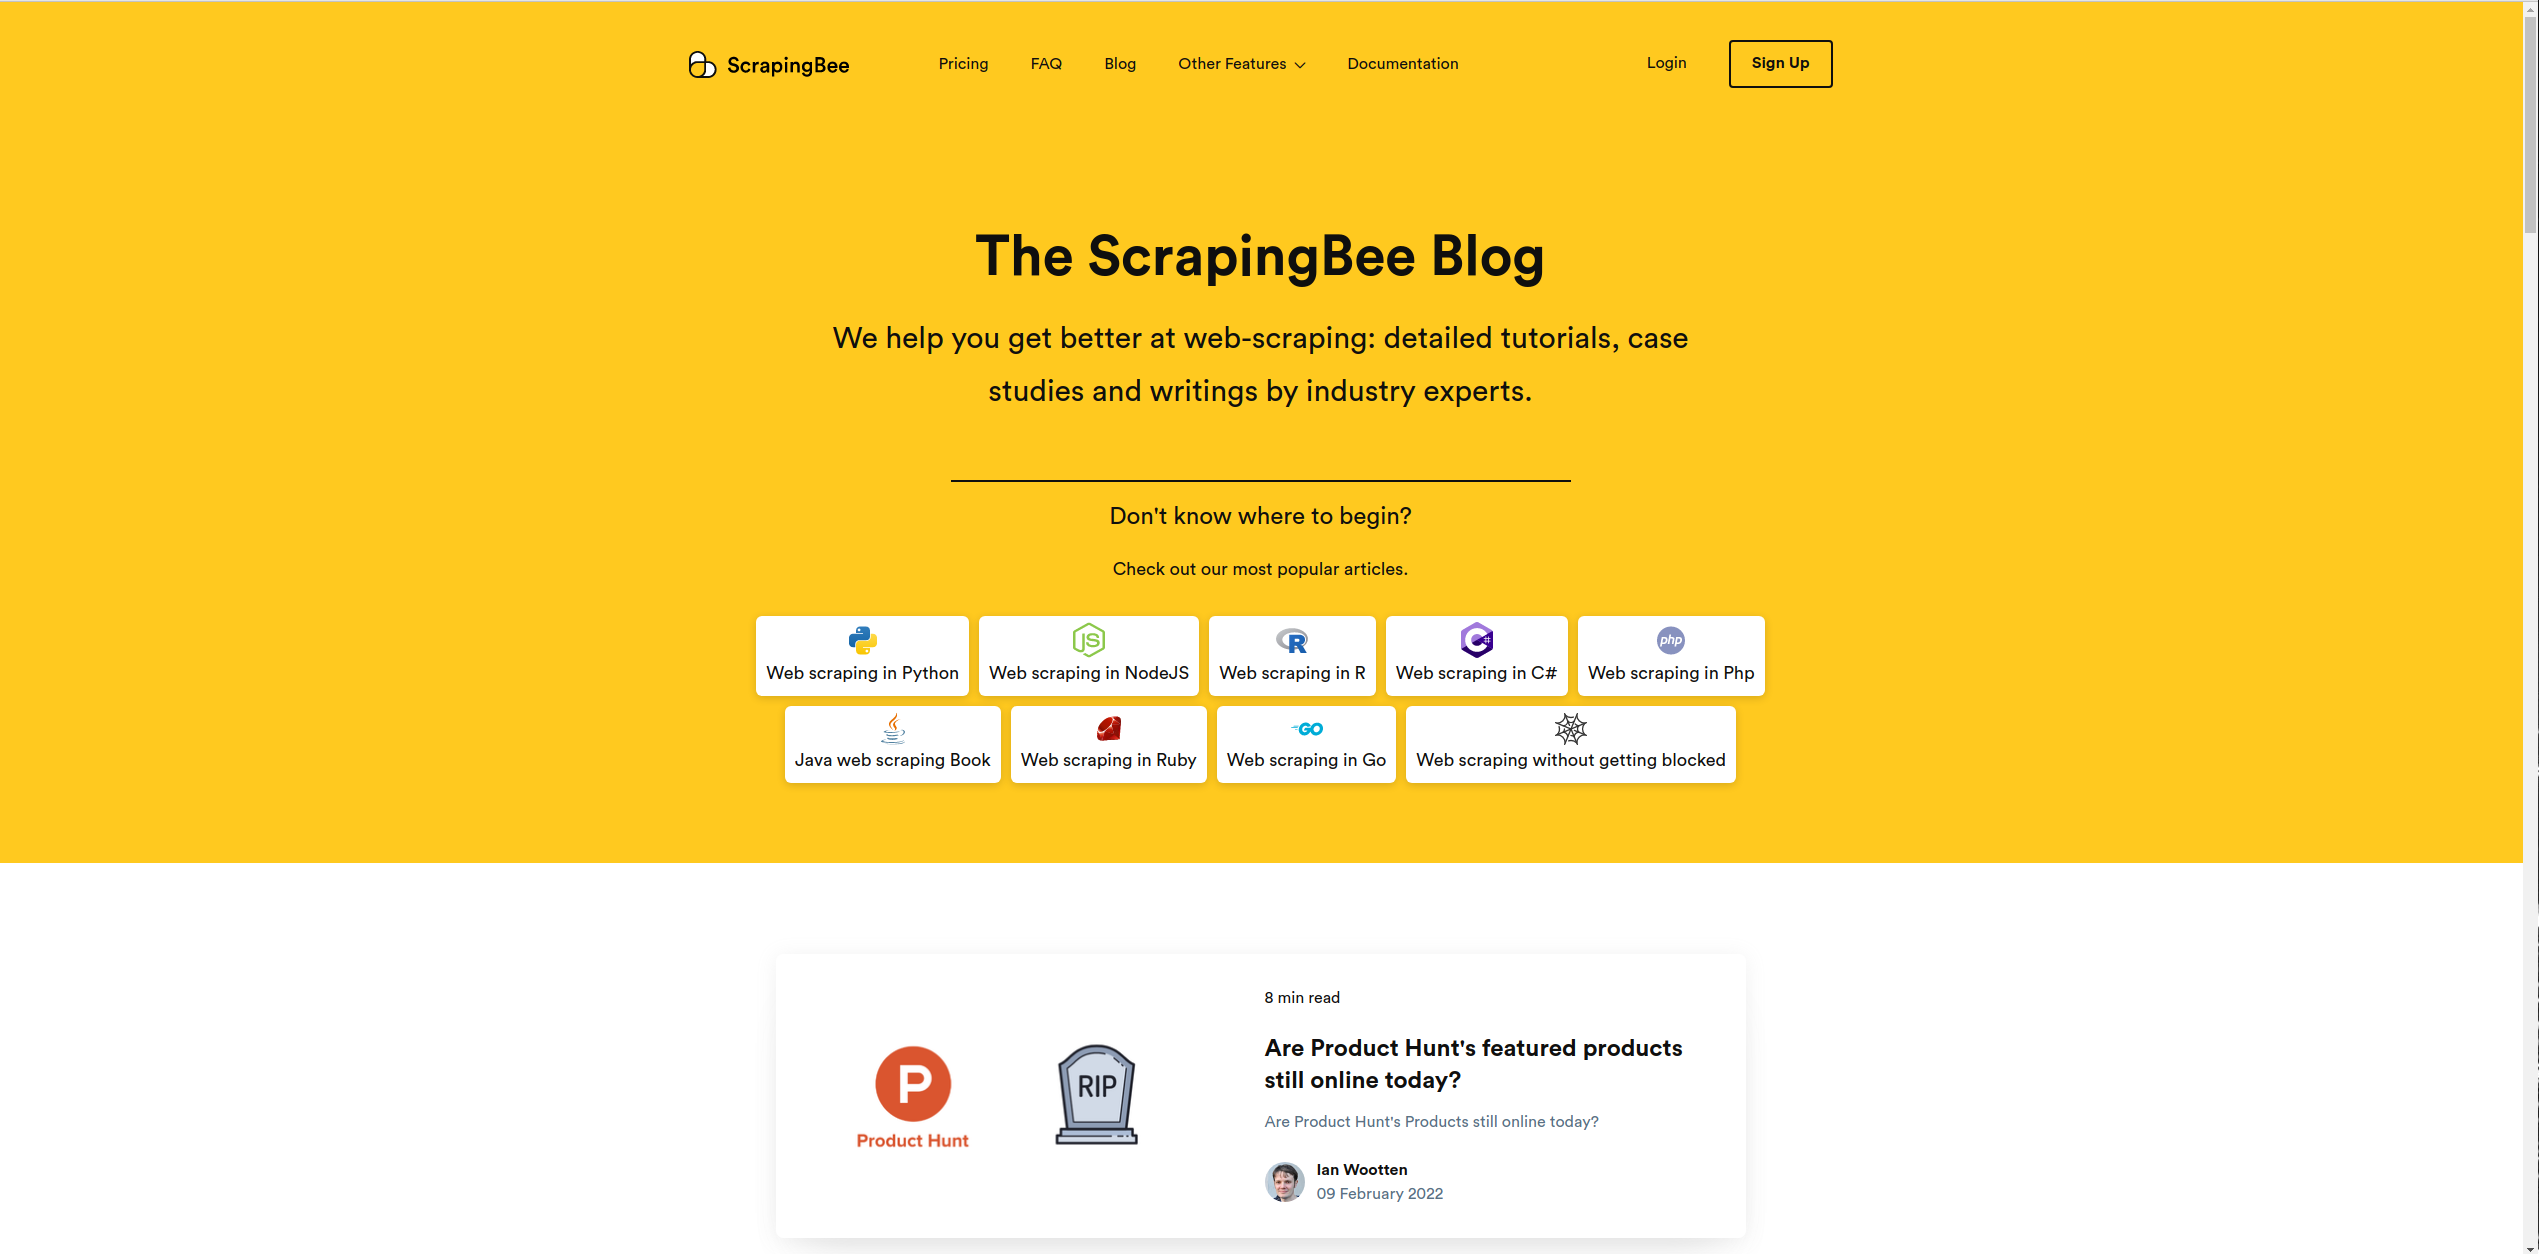 ScrapingBee's blog page